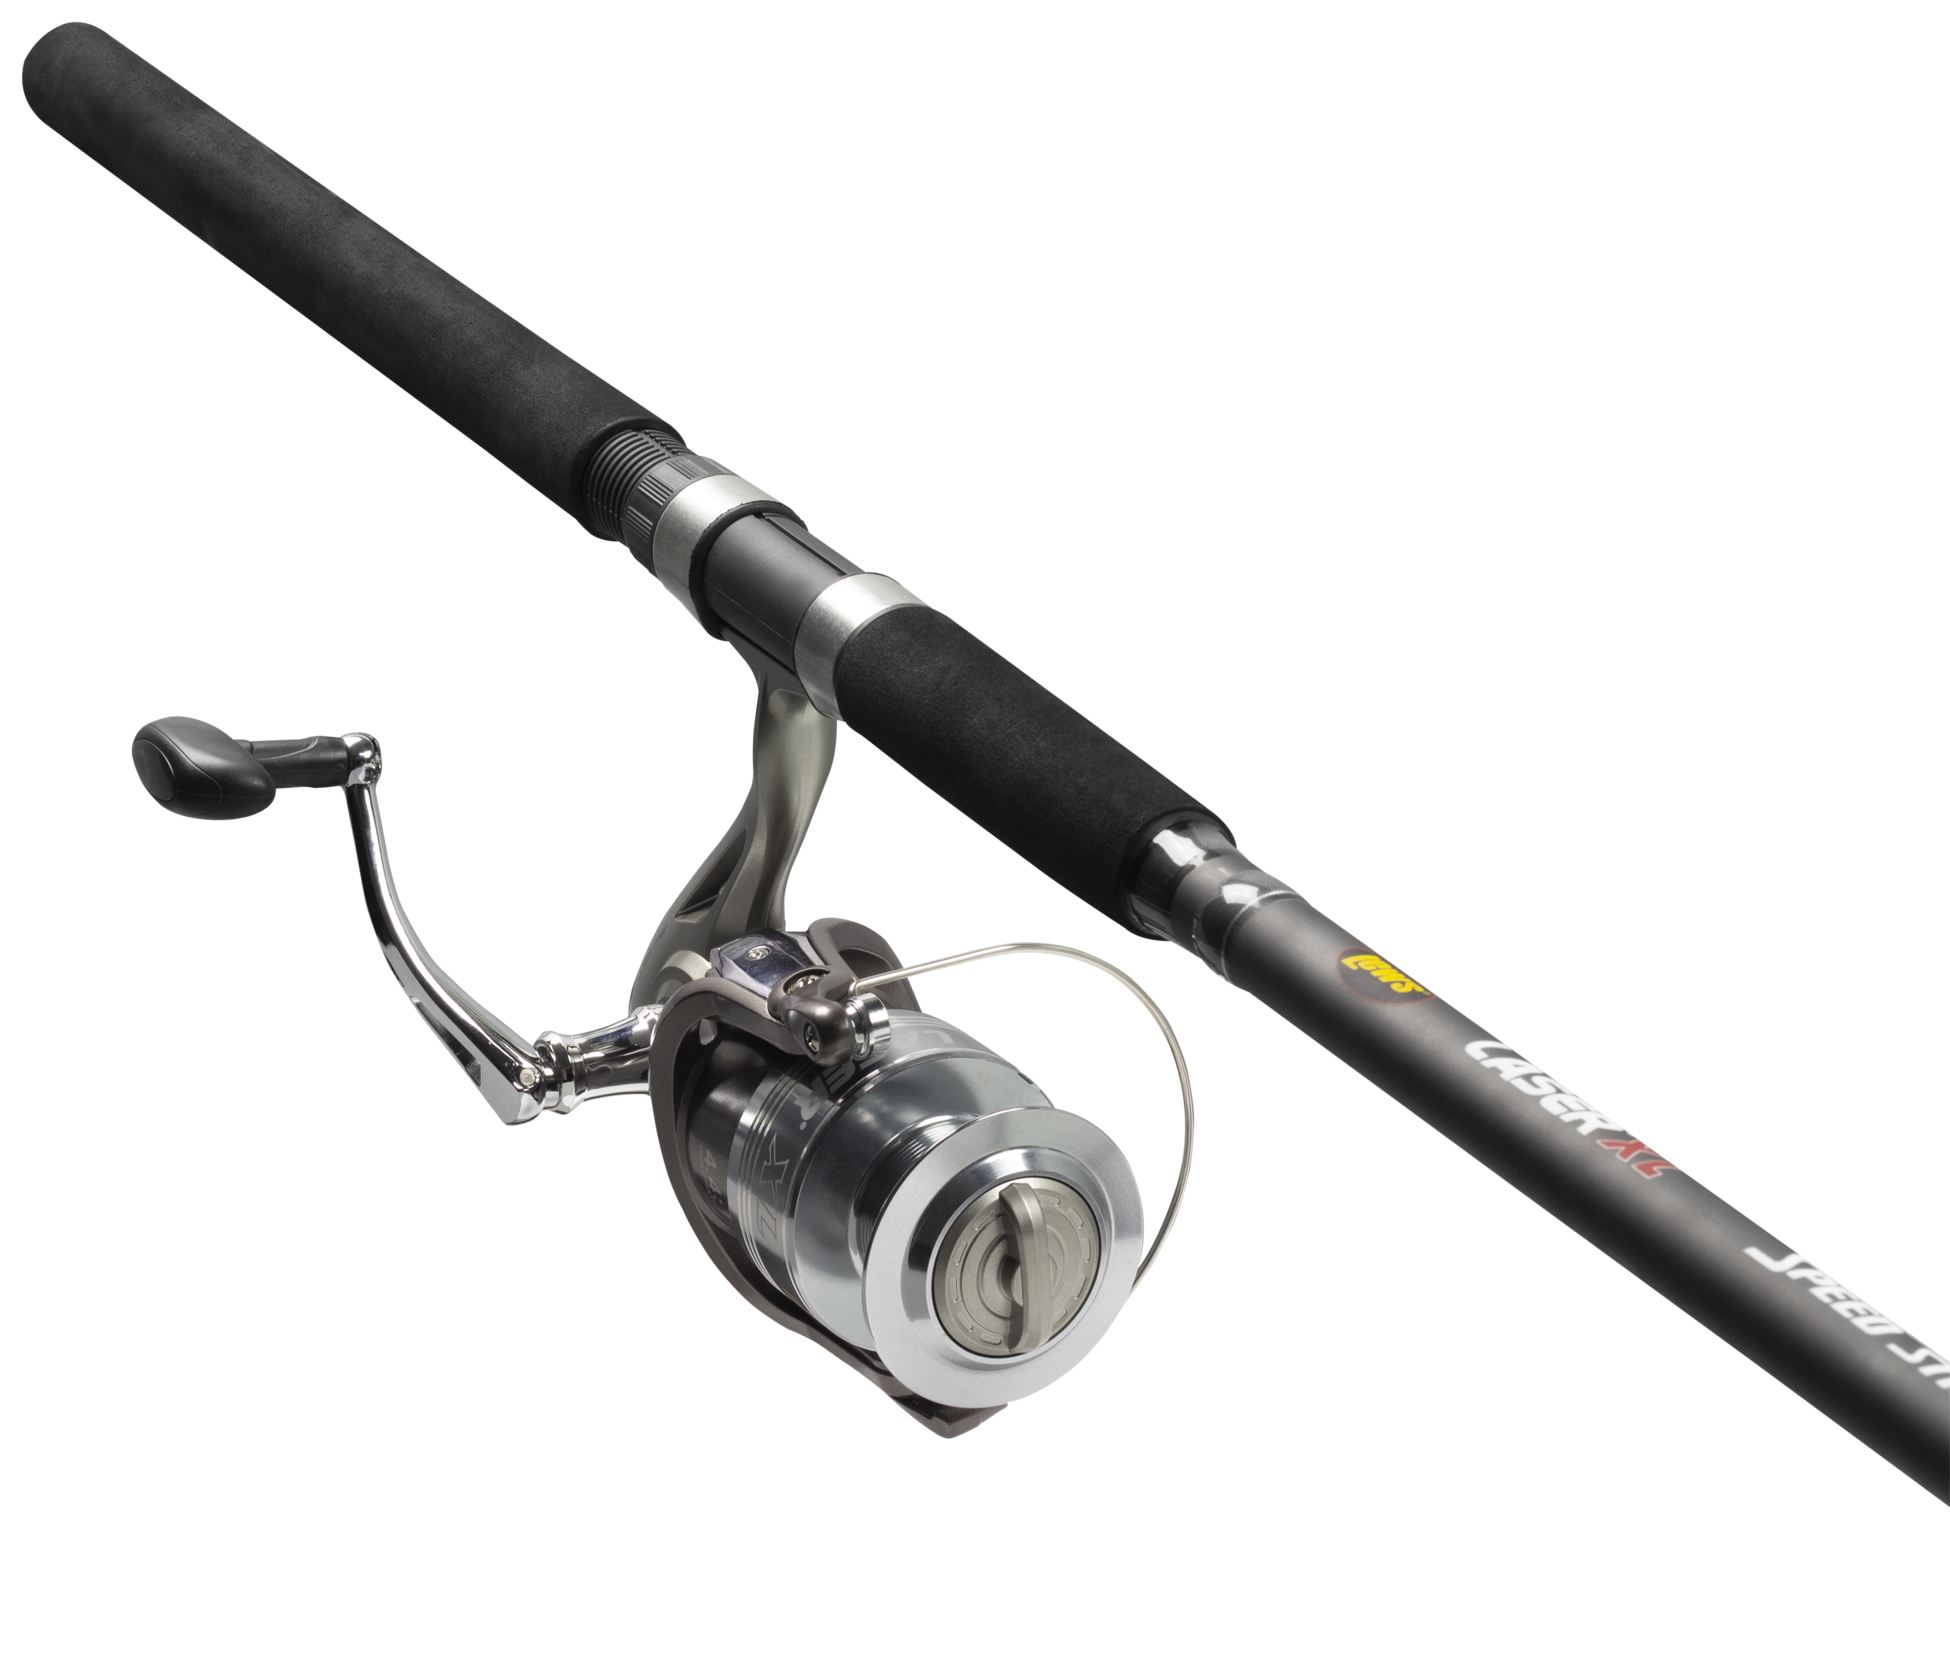 15 Fishing rod and reel combos ideas  fishing rods and reels, rod and reel,  fishing rod